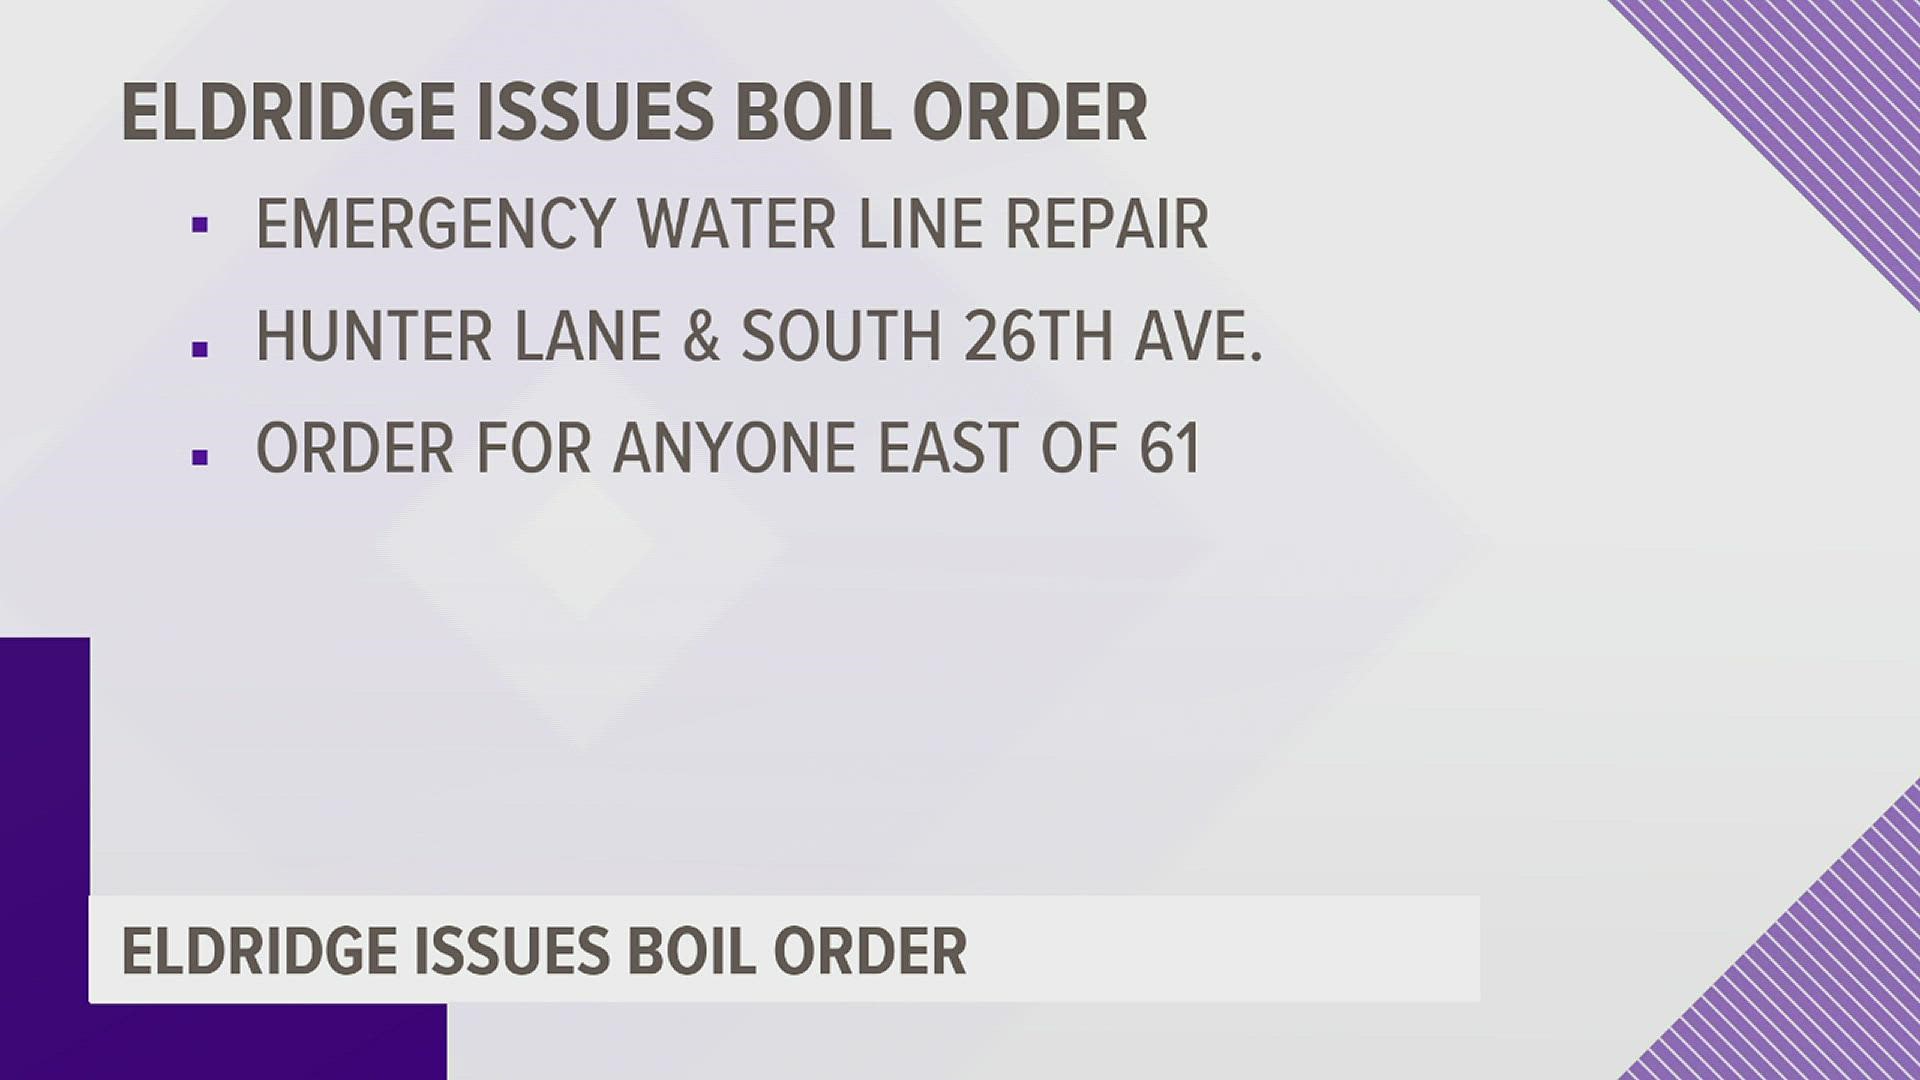 Water service is interrupted east of Route 61 in Eldridge for emergency repairs and a boil order is in effect.